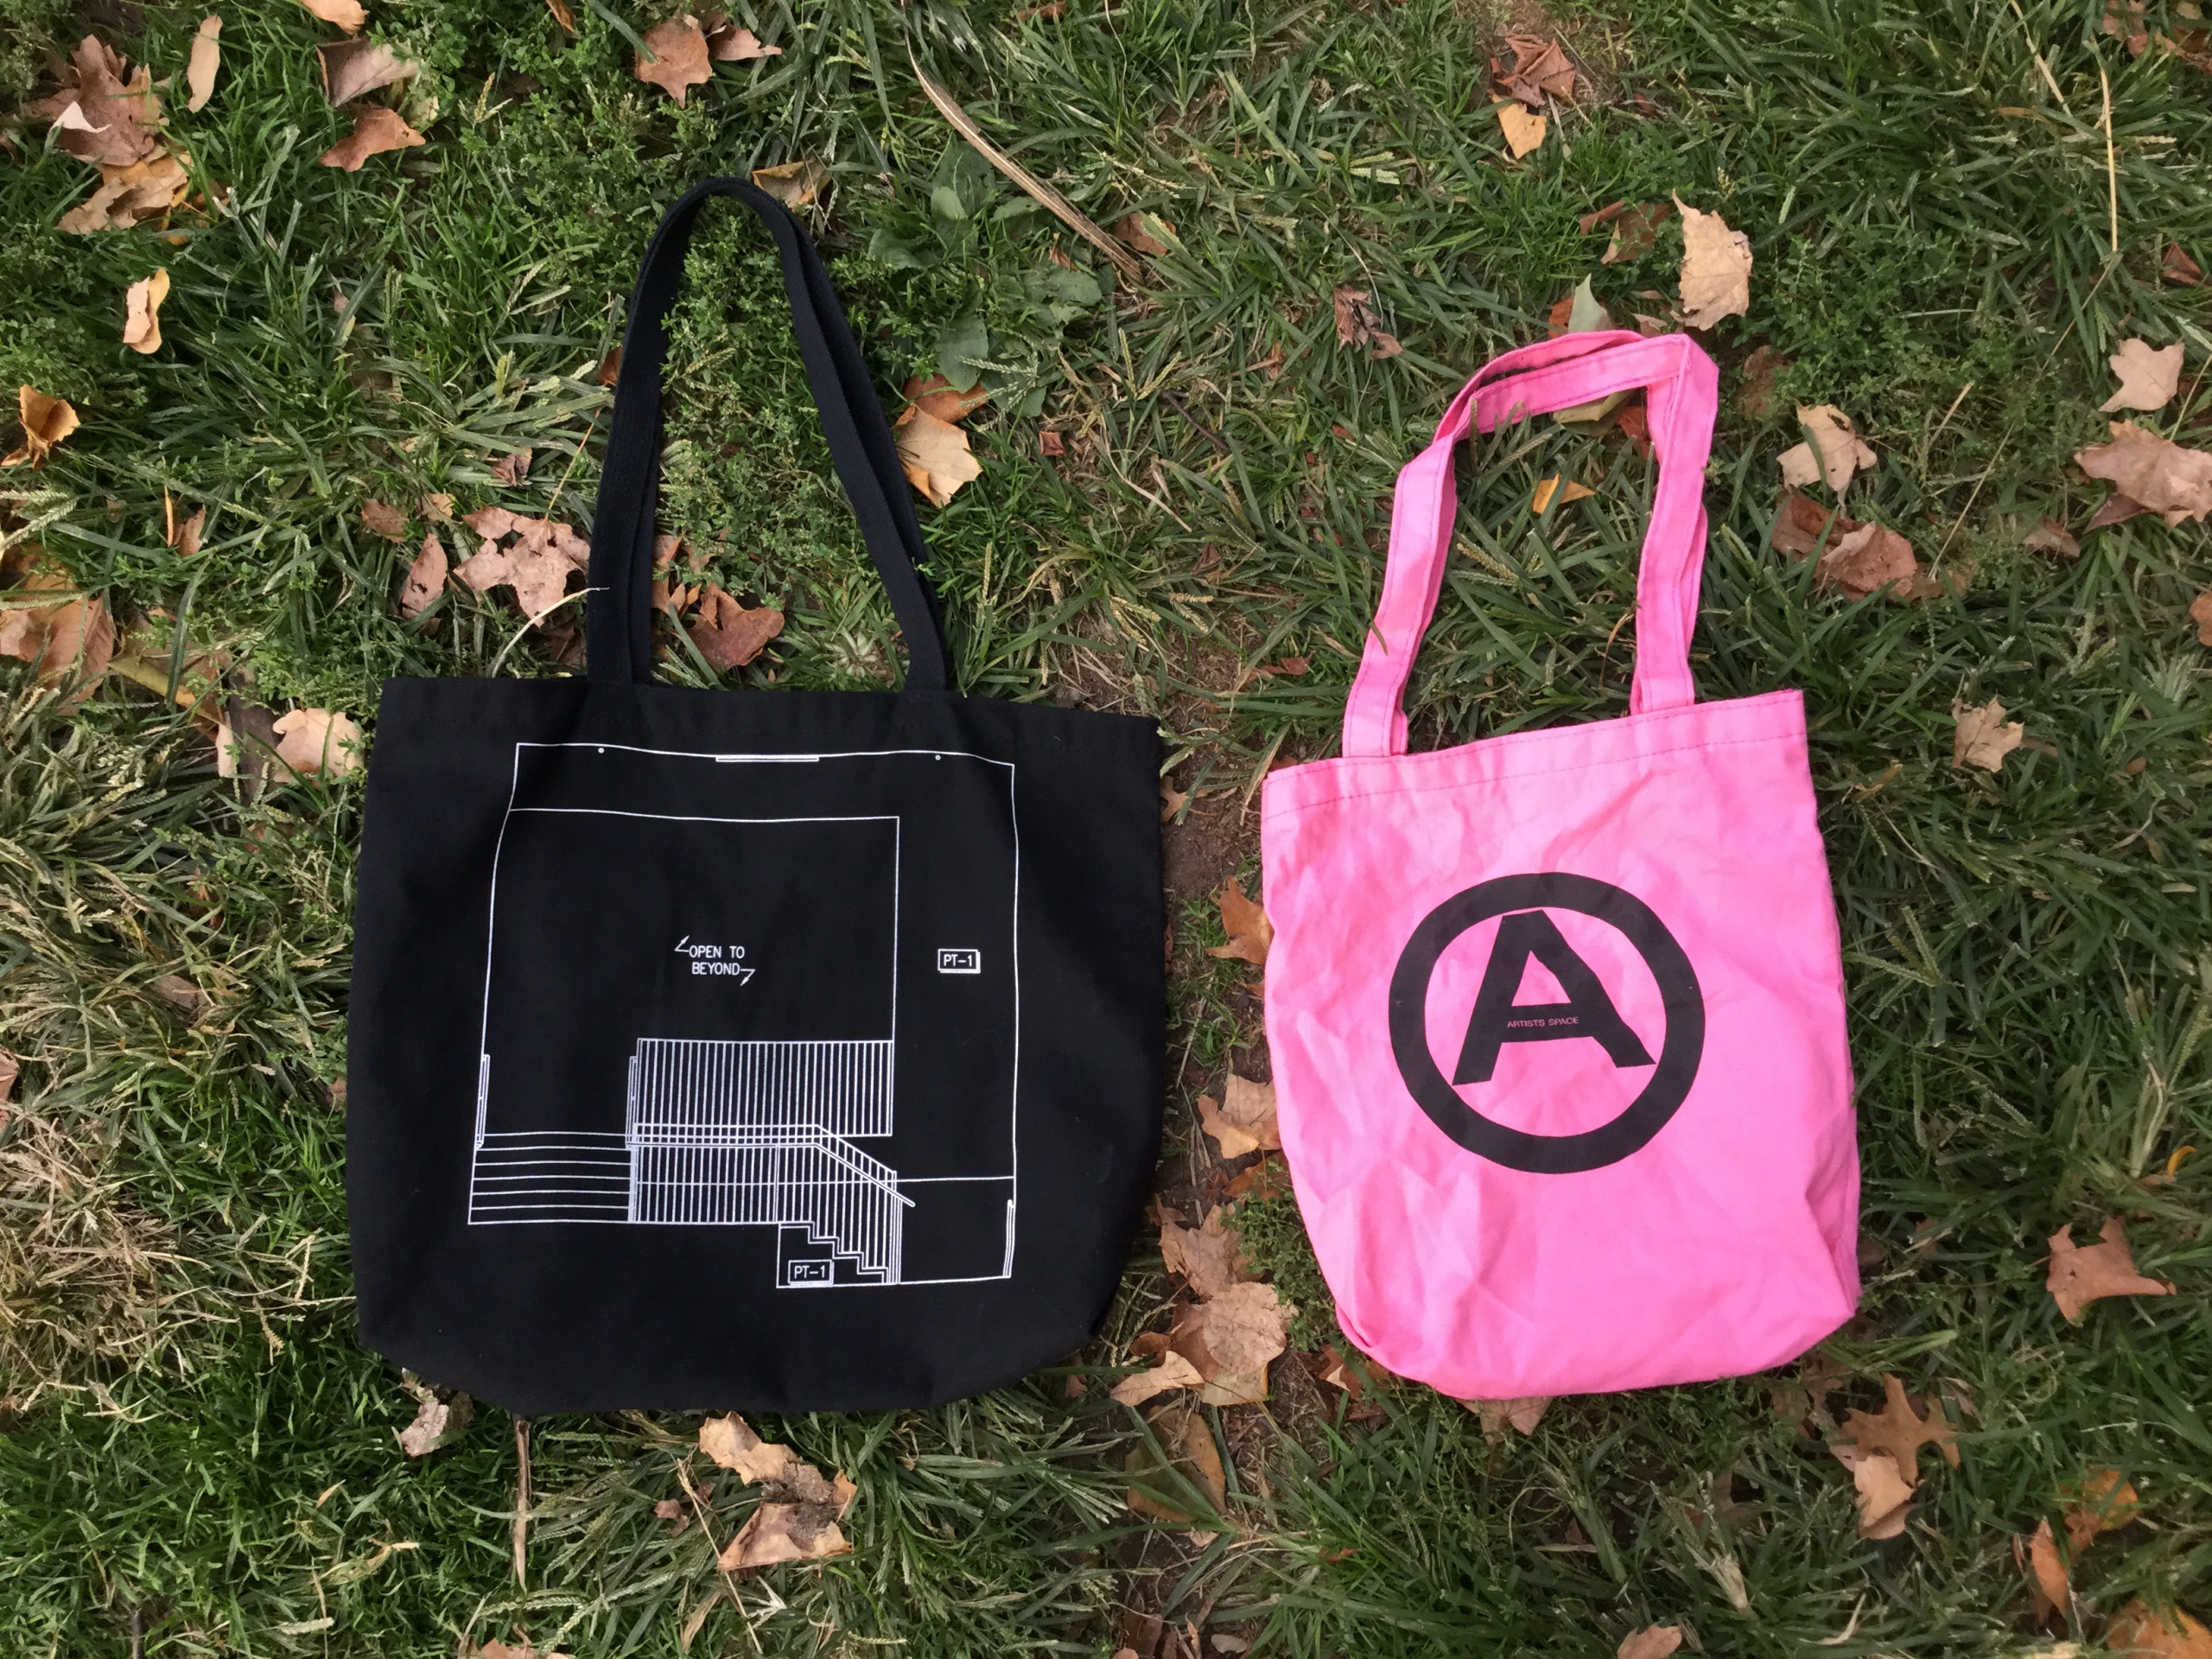 Two Artists Space tote bags lay in the autumn grass. One is black with a white architectural line drawing with the phrase "OPEN TO BEYOND" at center, the other is pink with a black bold graphic of an "A" inside an outlined circle.